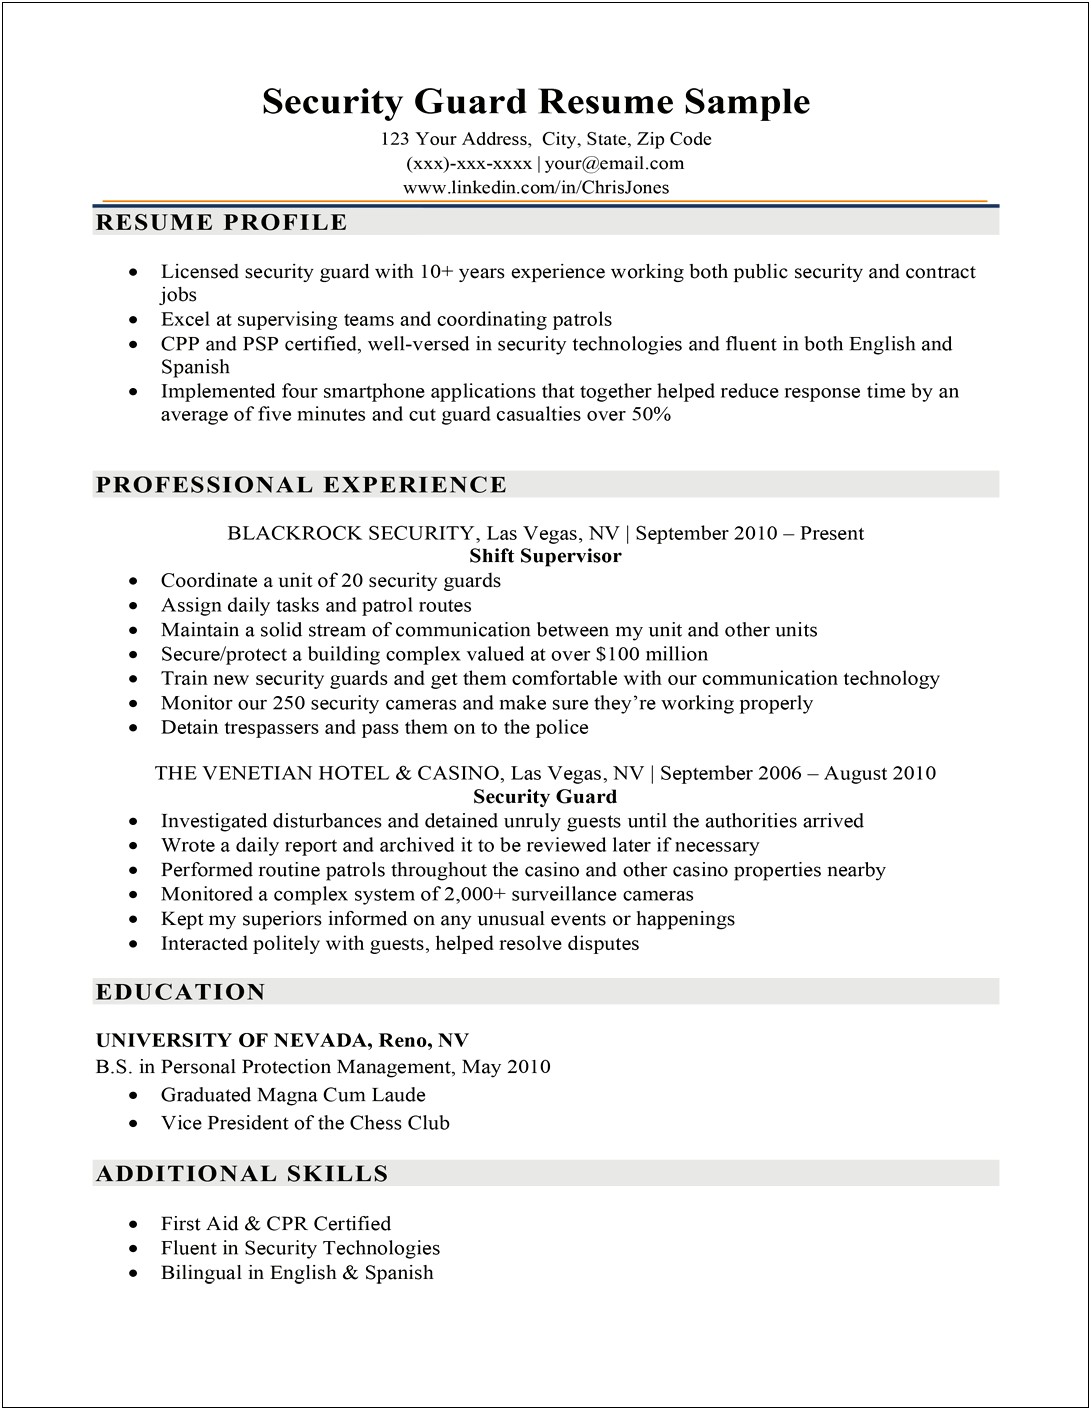 Putting National Guard Experience On Resume